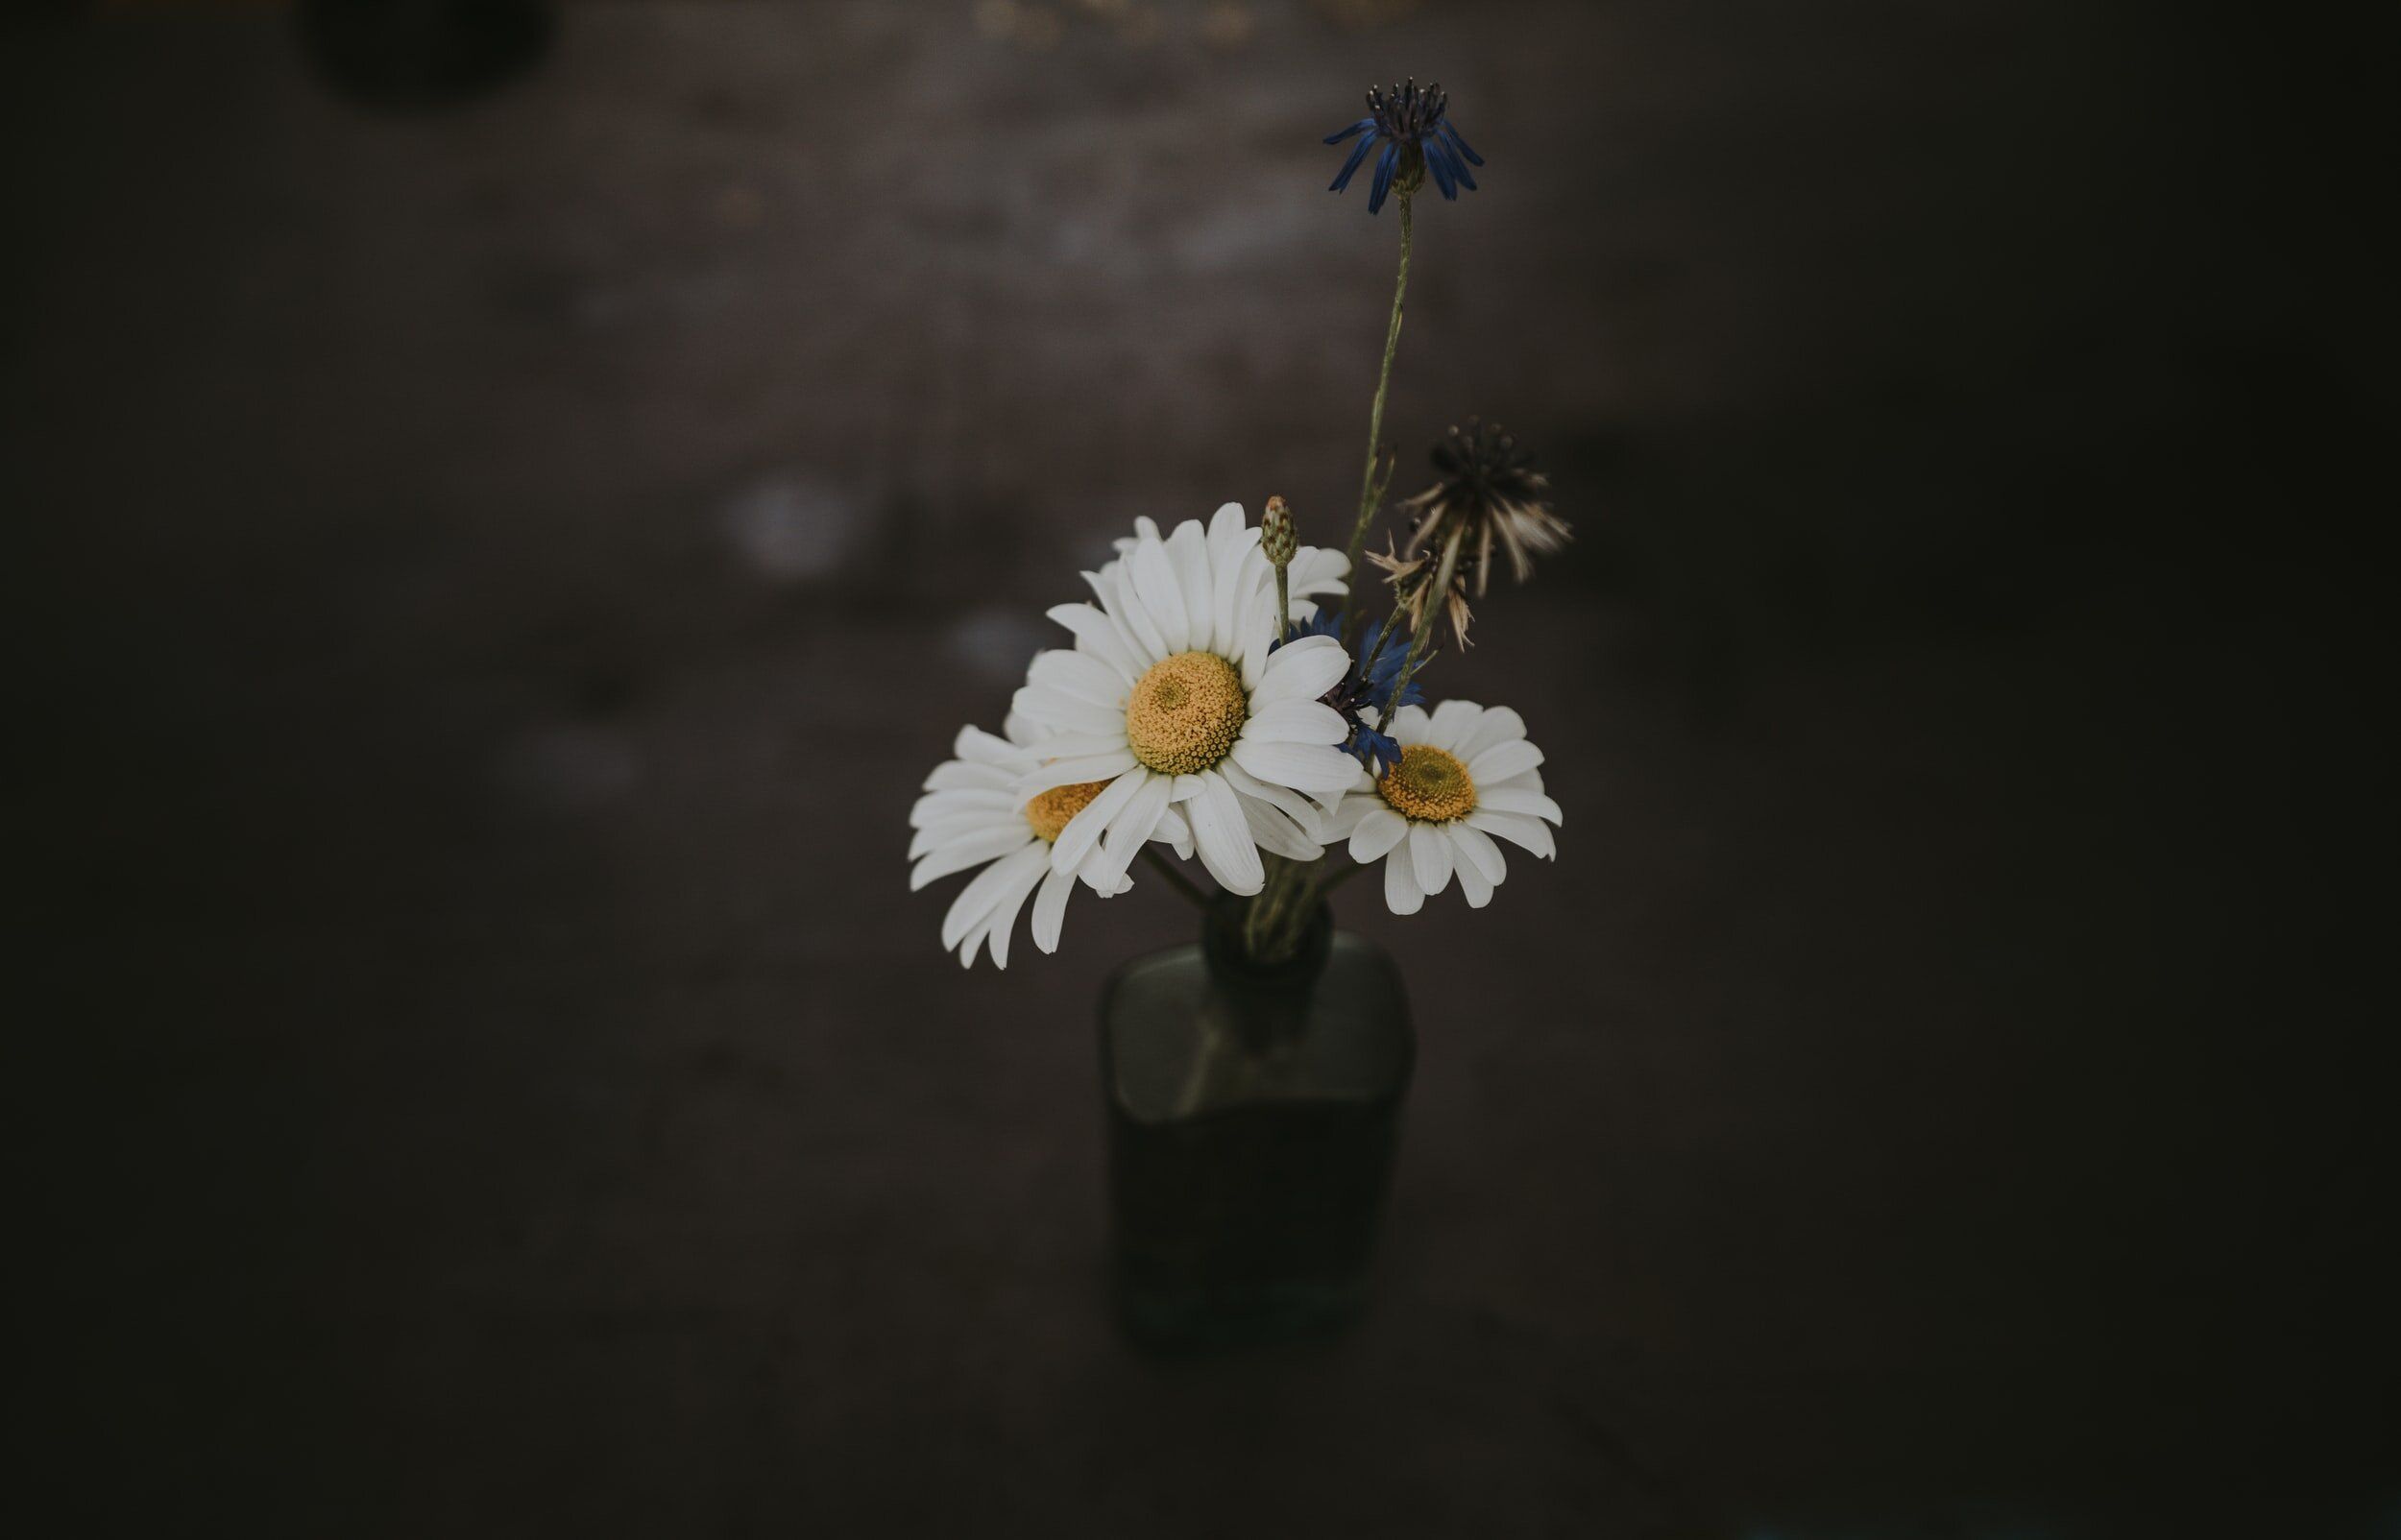 A vase with daisies in it on a table. - Dark academia